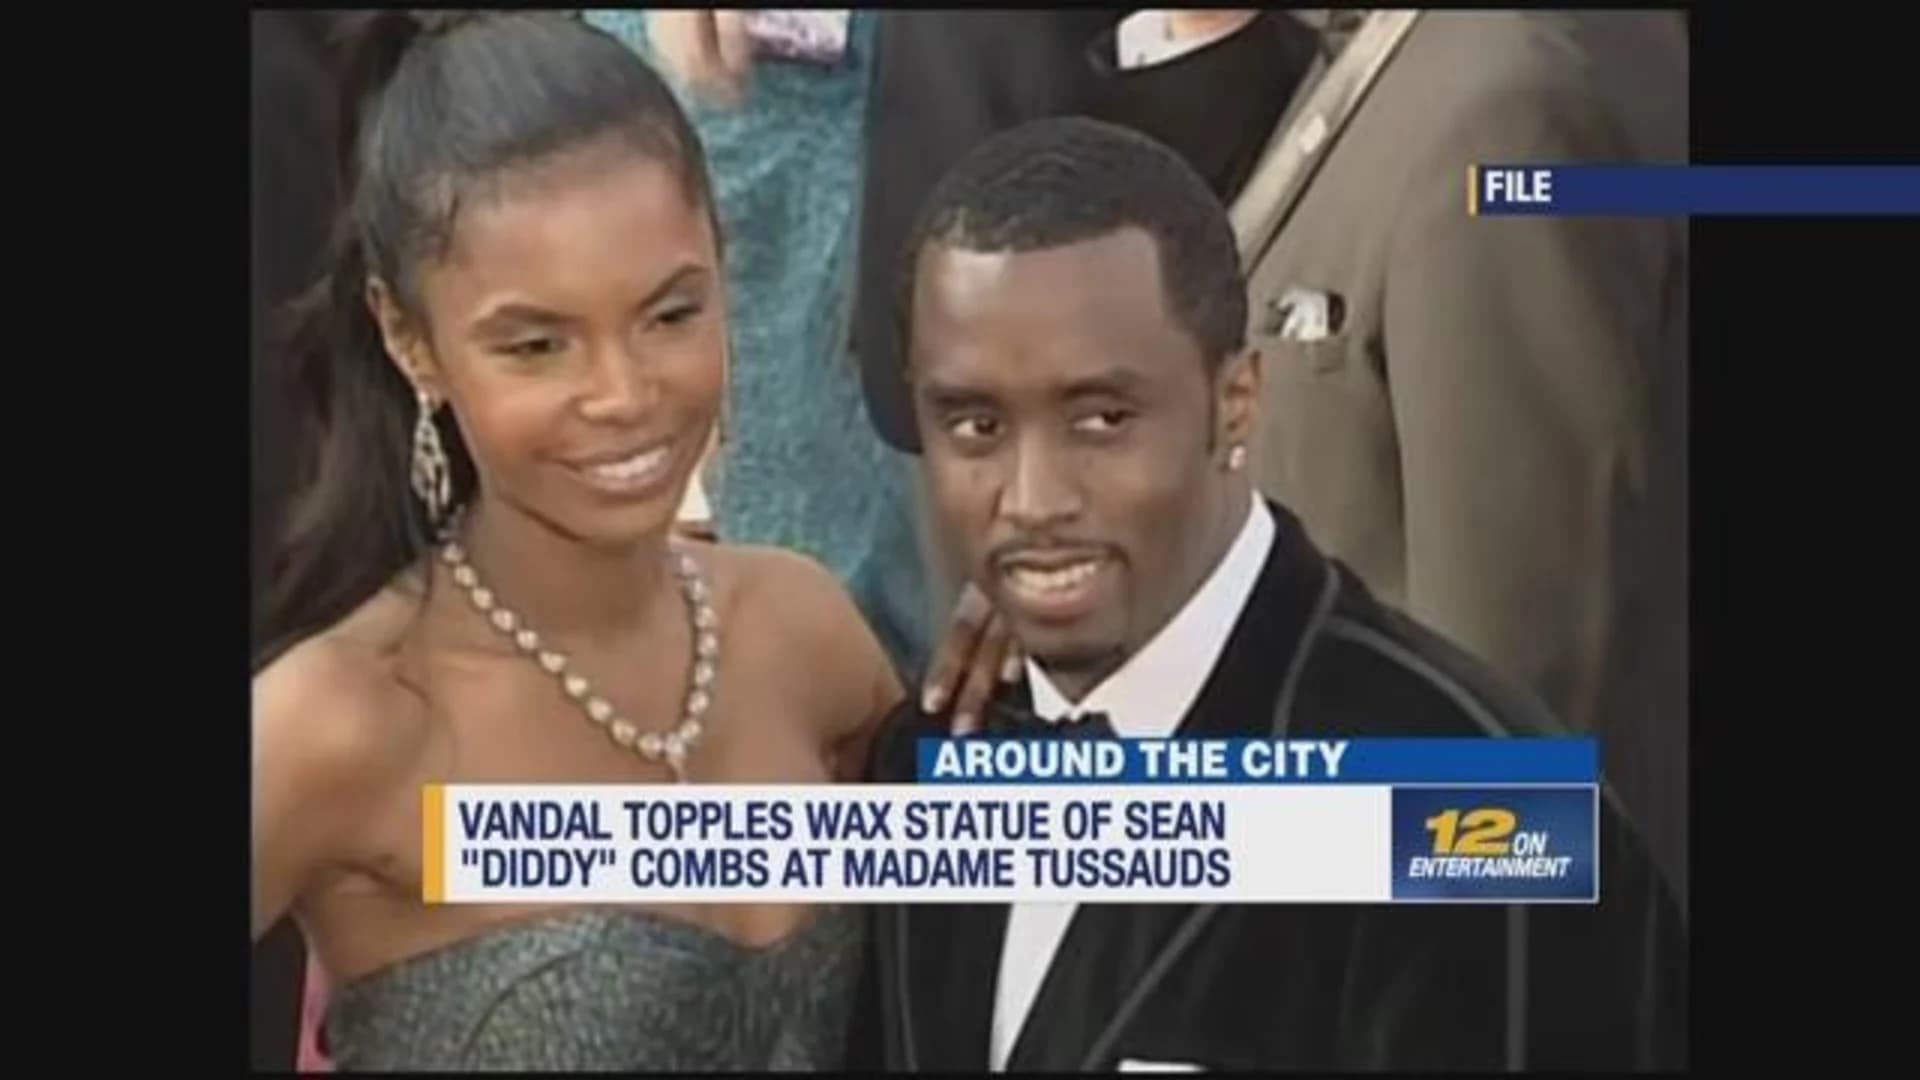 Vandal topples wax statue of Sean 'Diddy' Combs